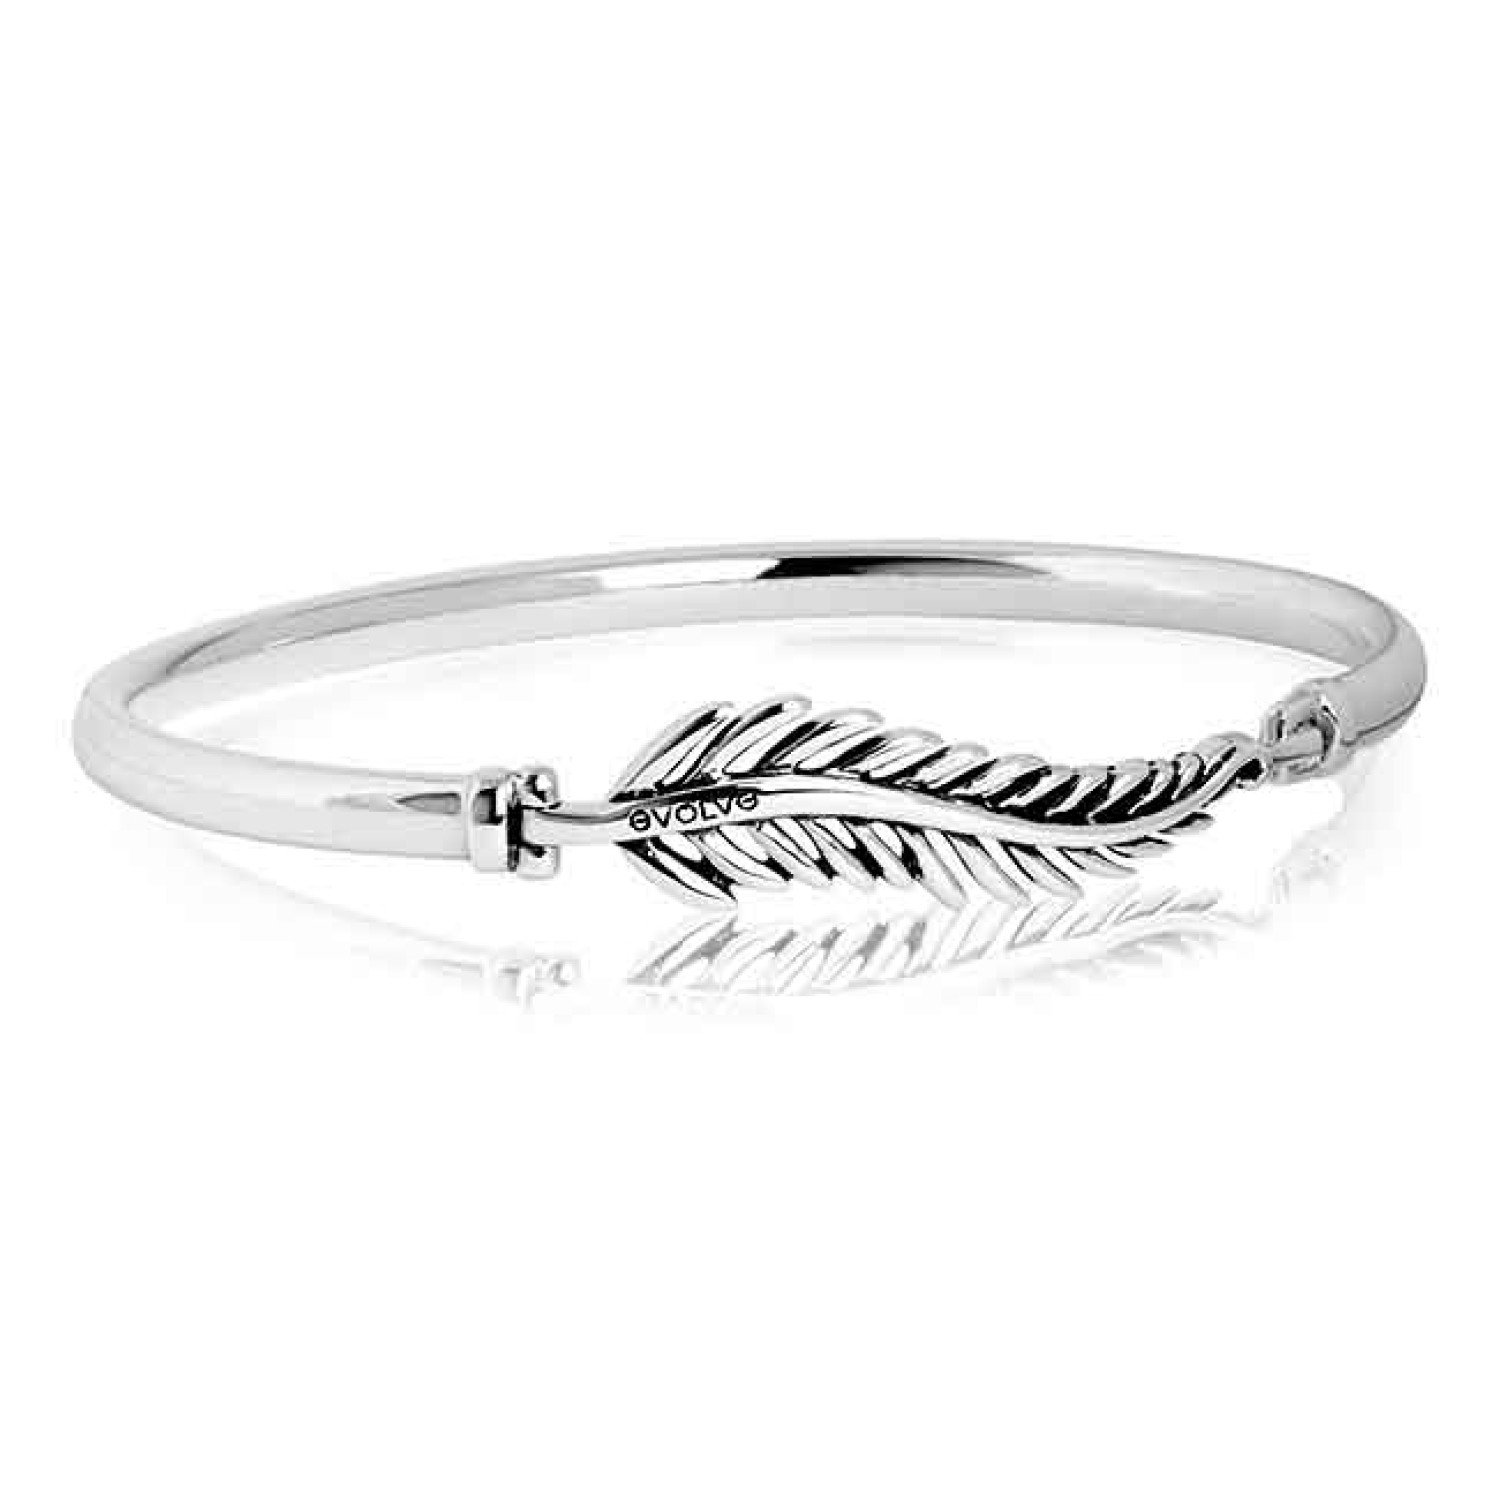 Evolve Silver Fern Bangle. The silver fern is widely used as a symbol by New Zealand national sports teams in various stylised forms. Silver Ferns is the name of the national netball team, and most other national womens sports teams have n @christies.onli